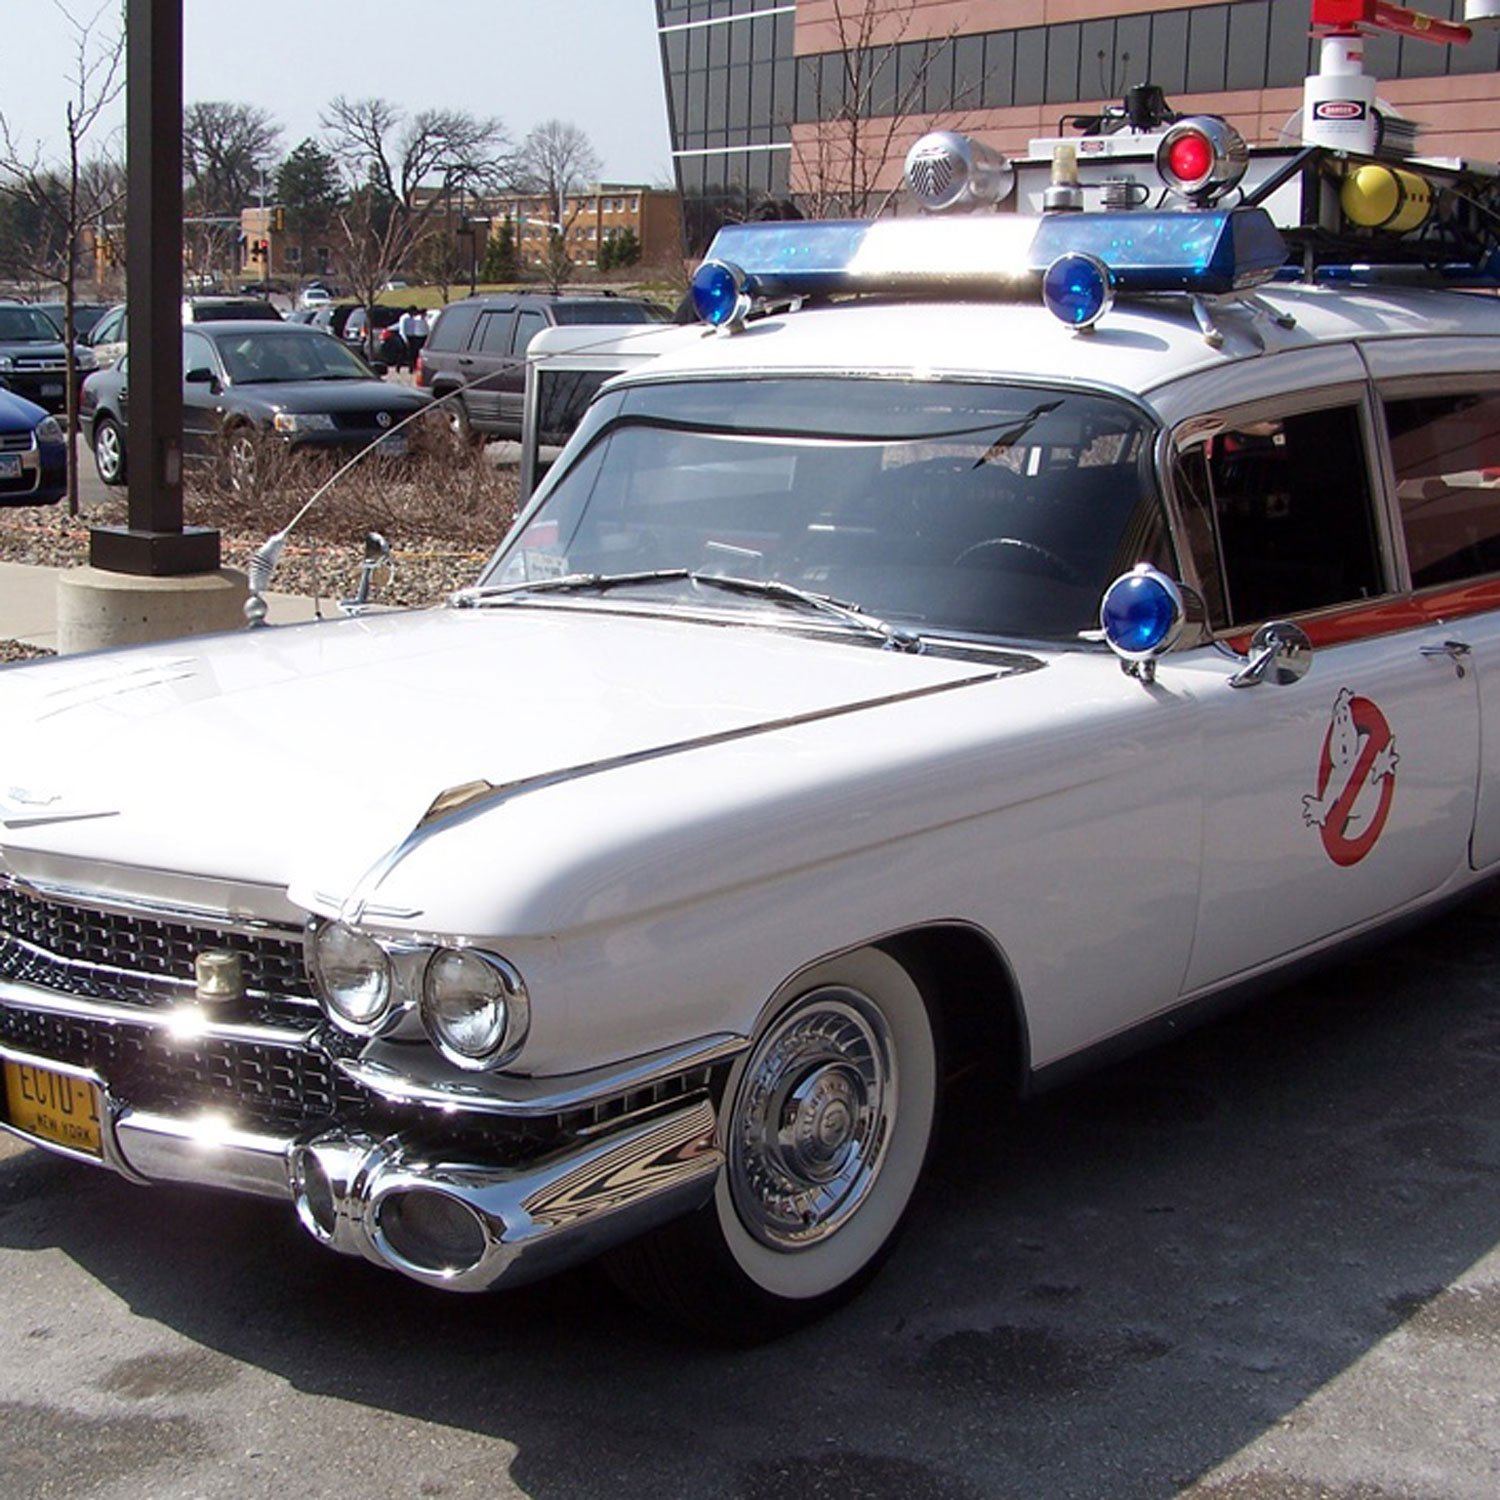 Wheel cap on real life Ghostbusters Ecto-1